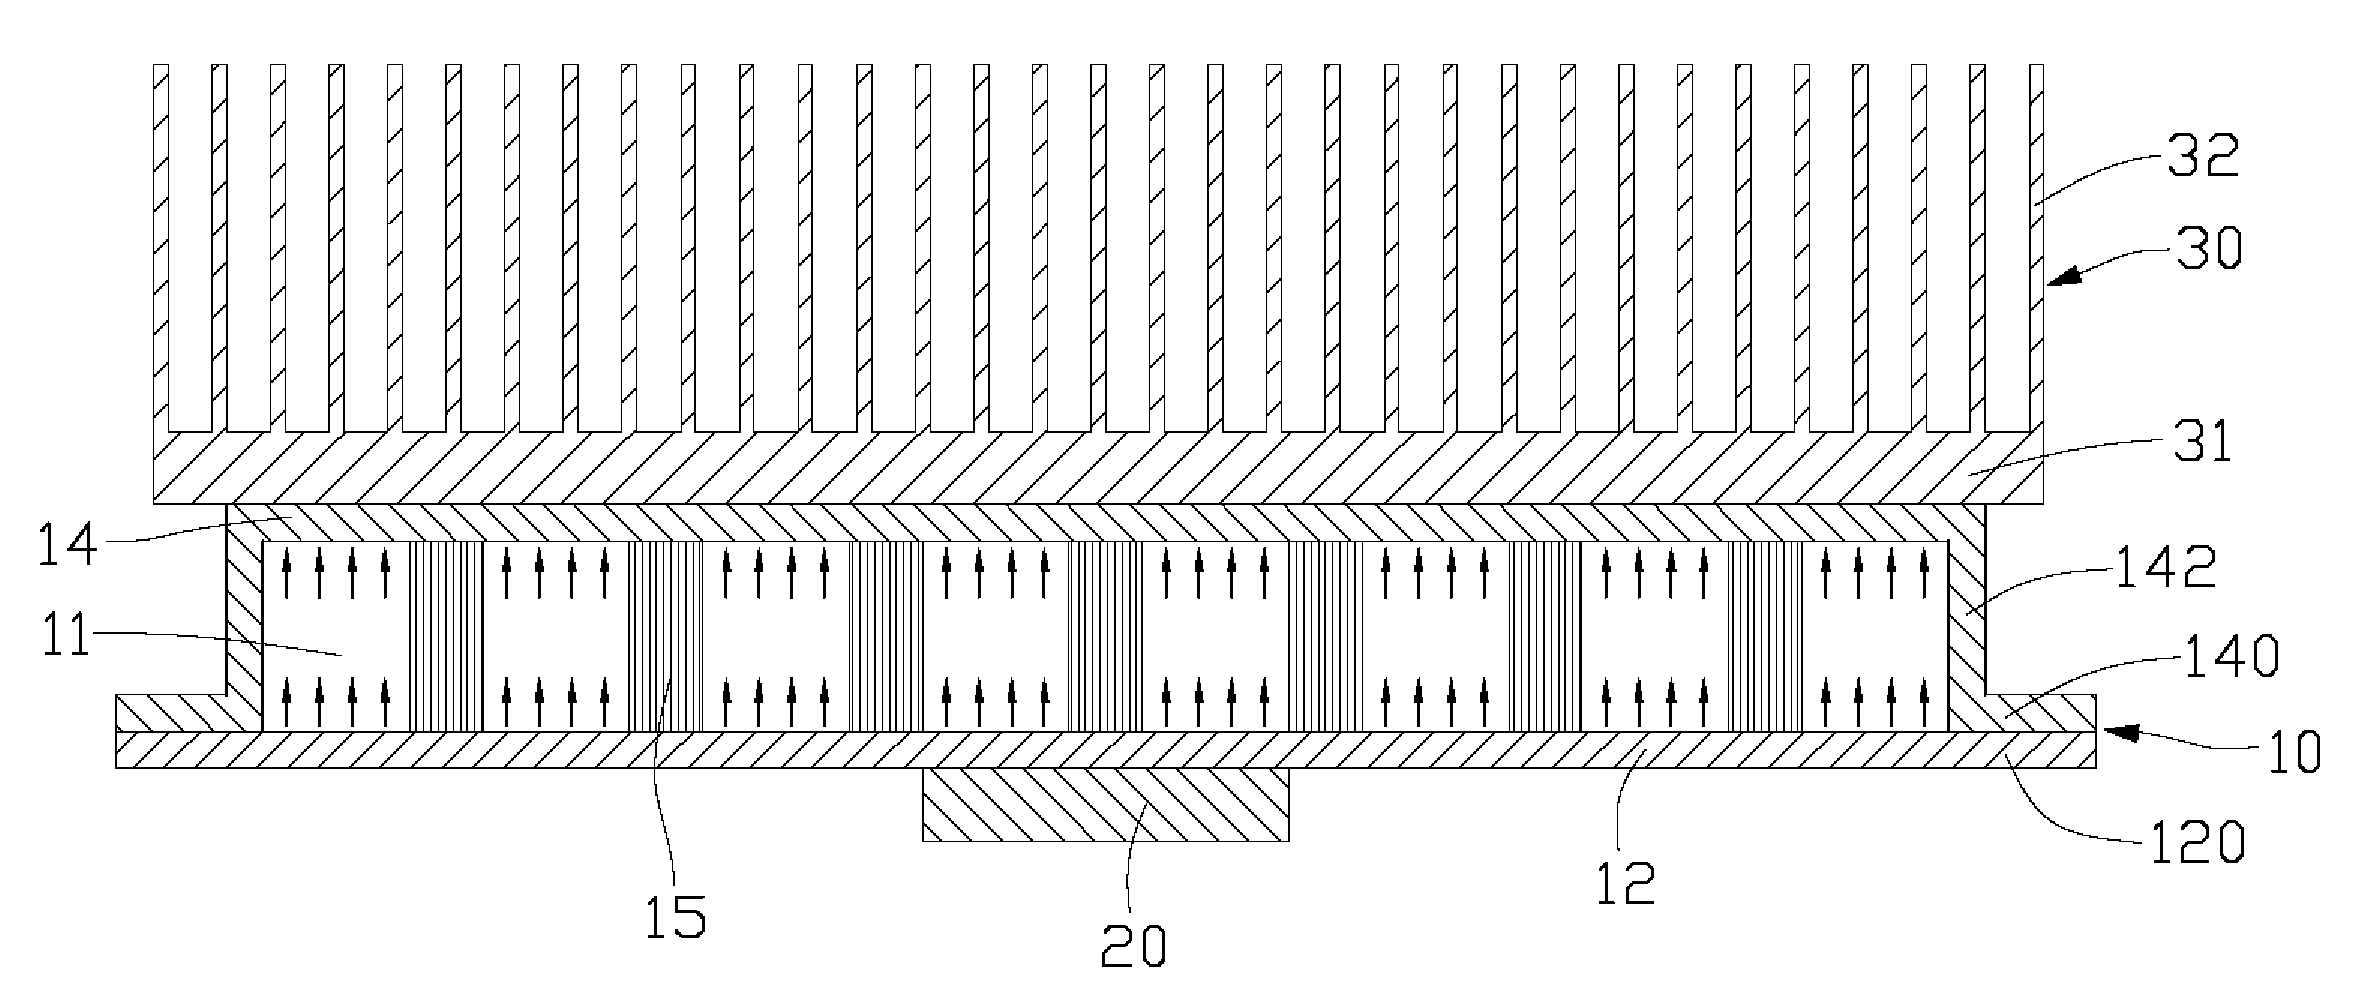 Heat spreader with vapor chamber defined therein